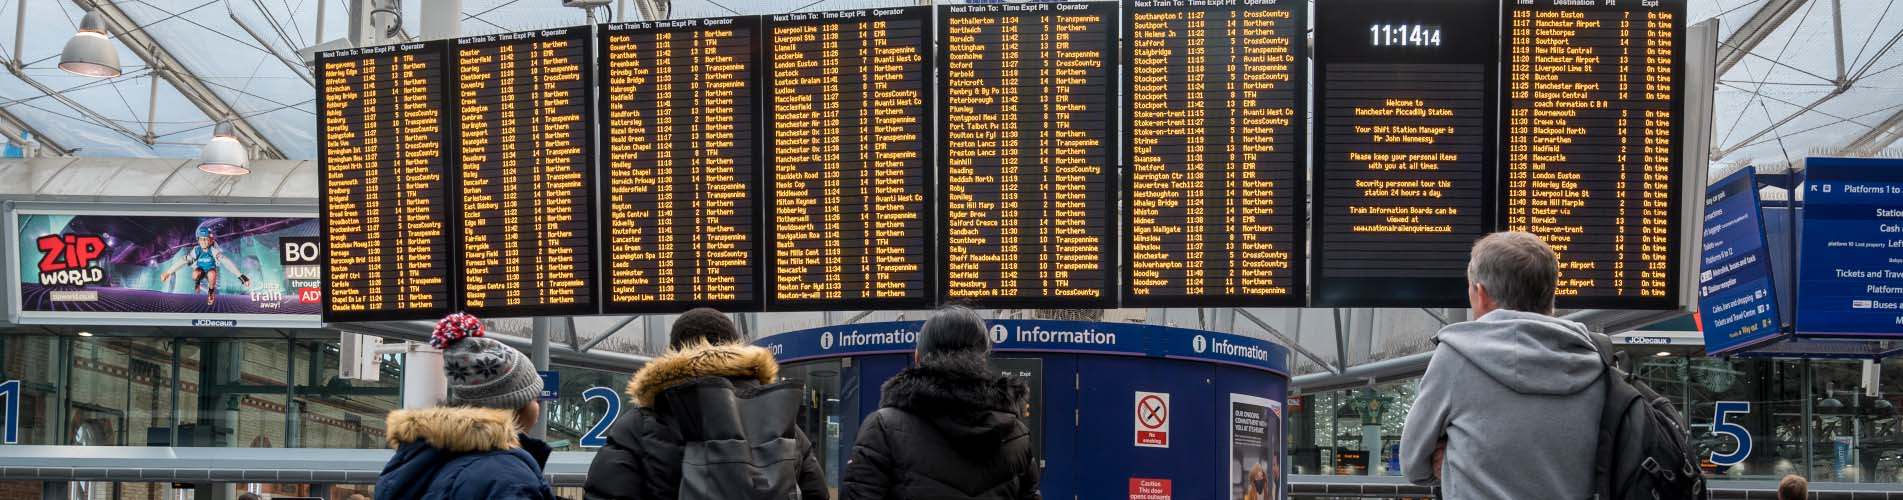 Passengers checking an information board at Manchester Piccadilly station